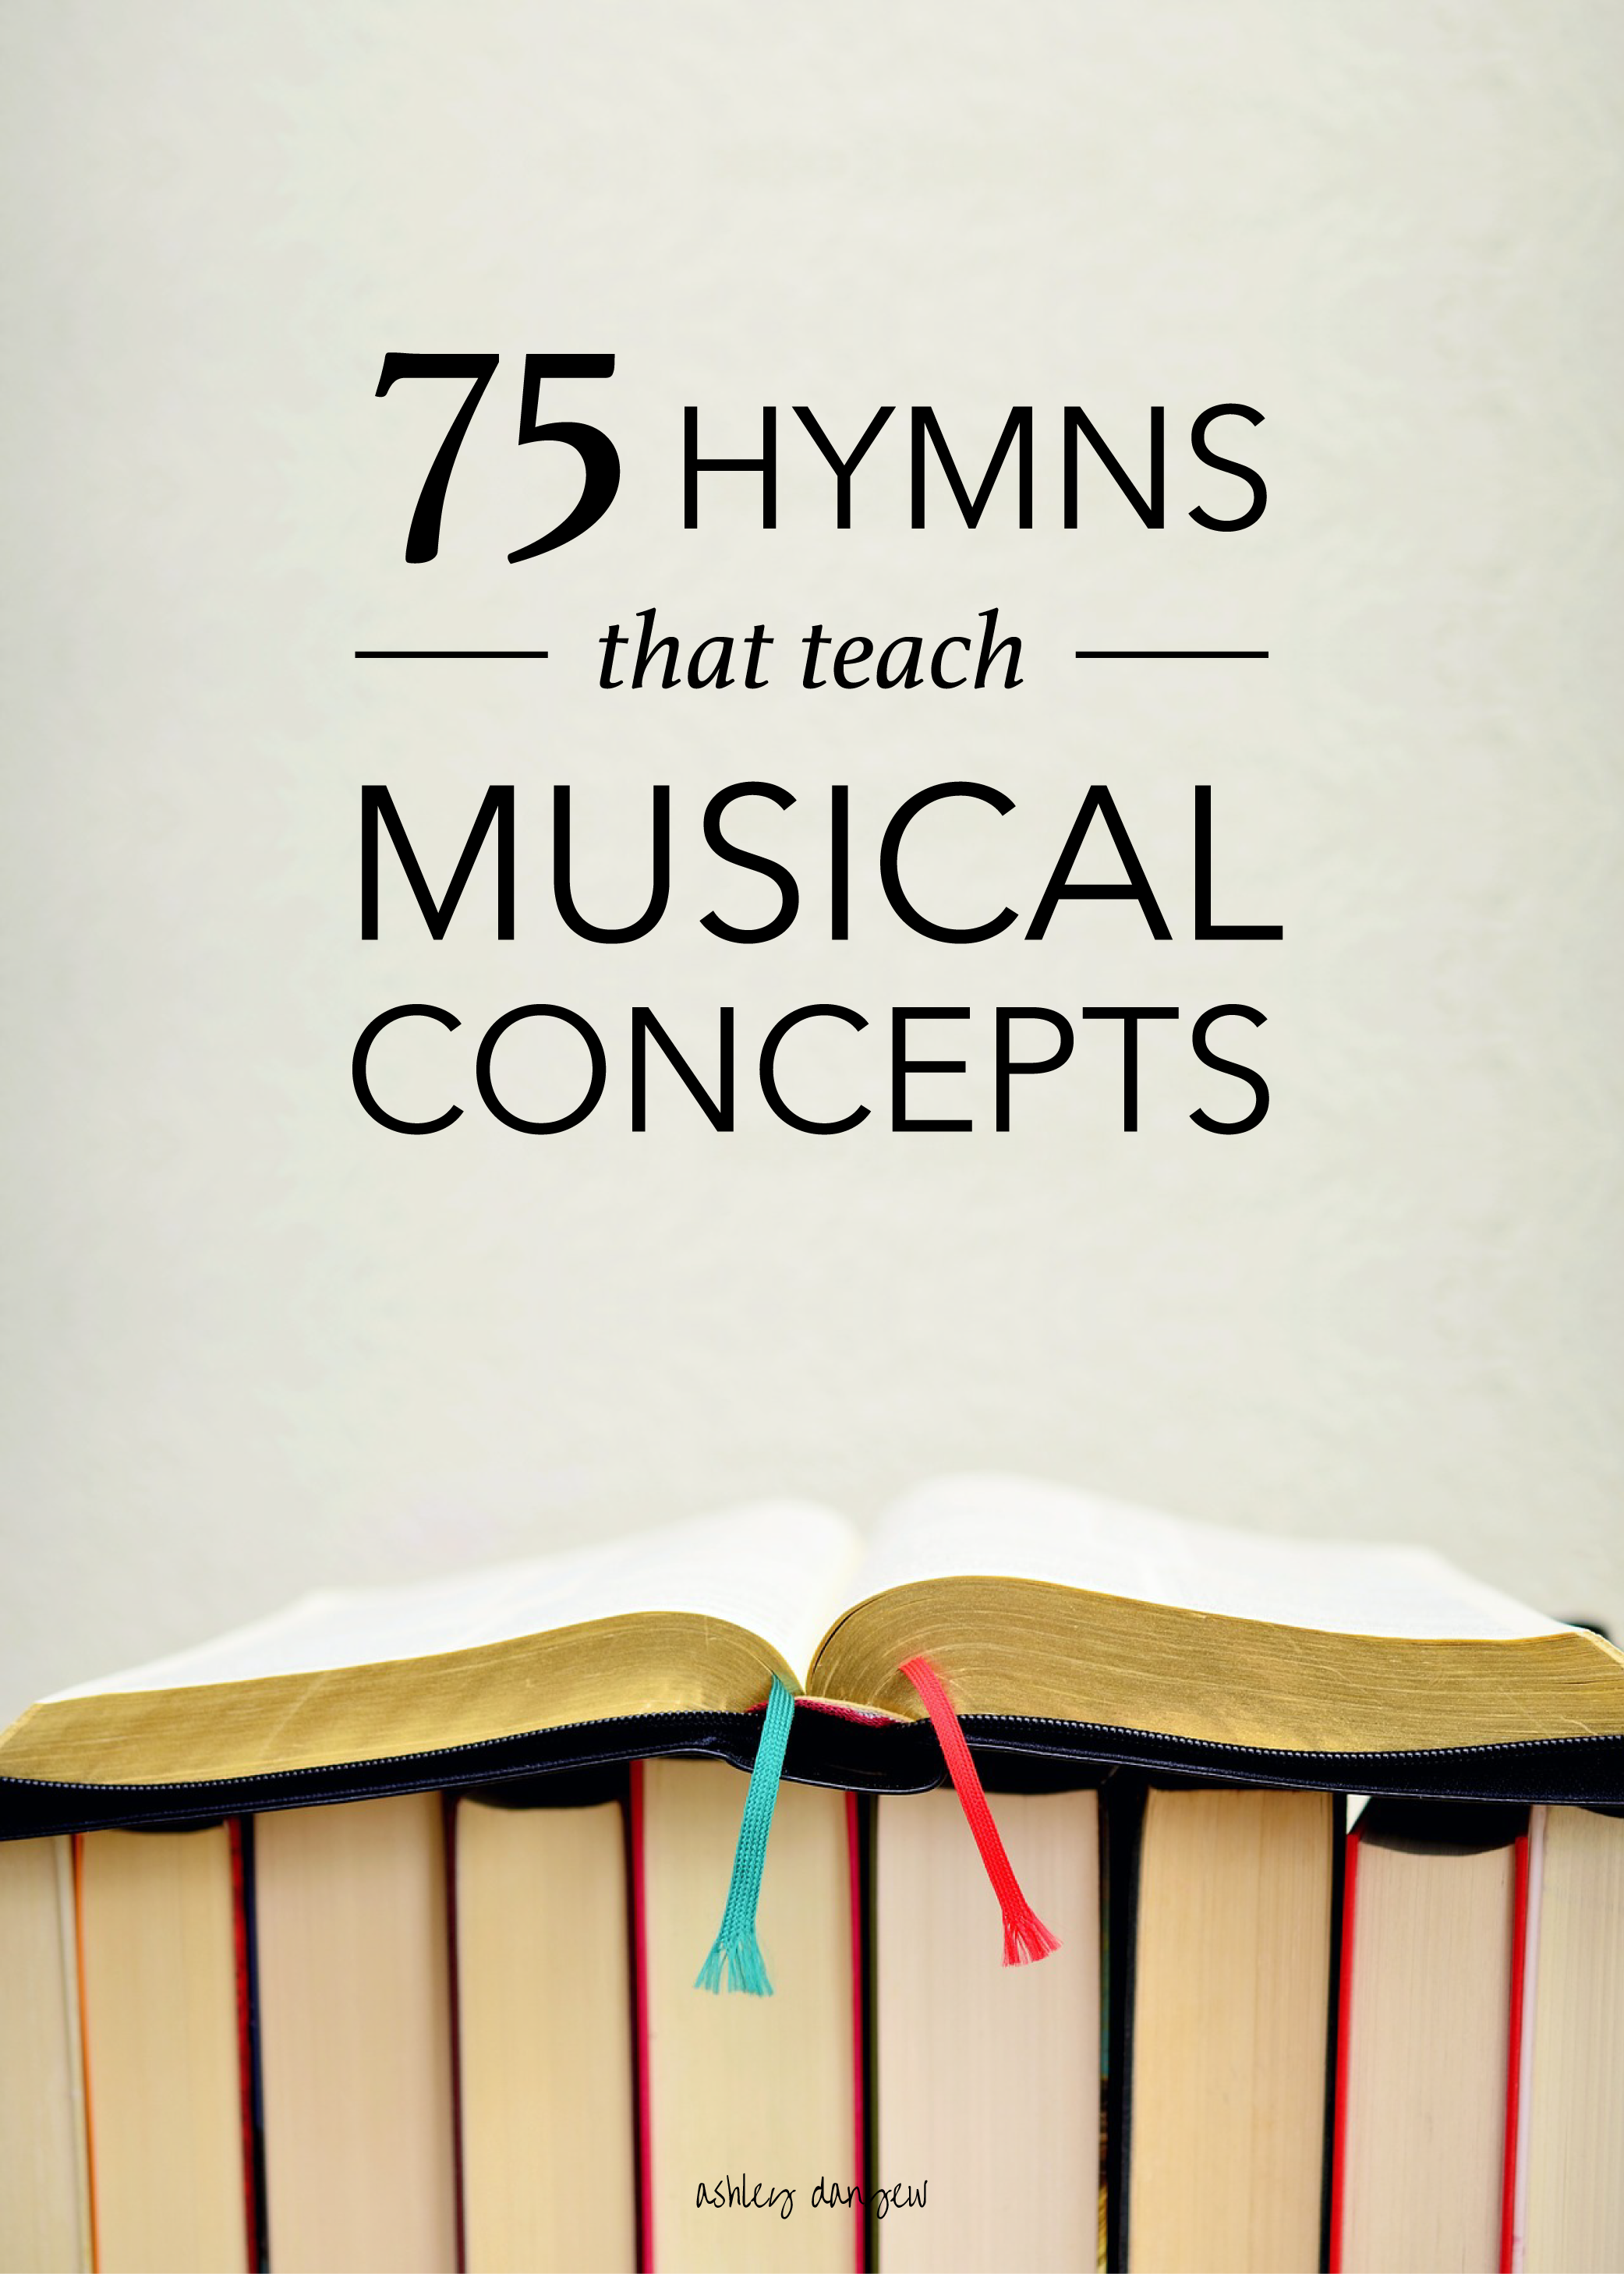 75 Hymns that Teach Musical Concepts-01.png